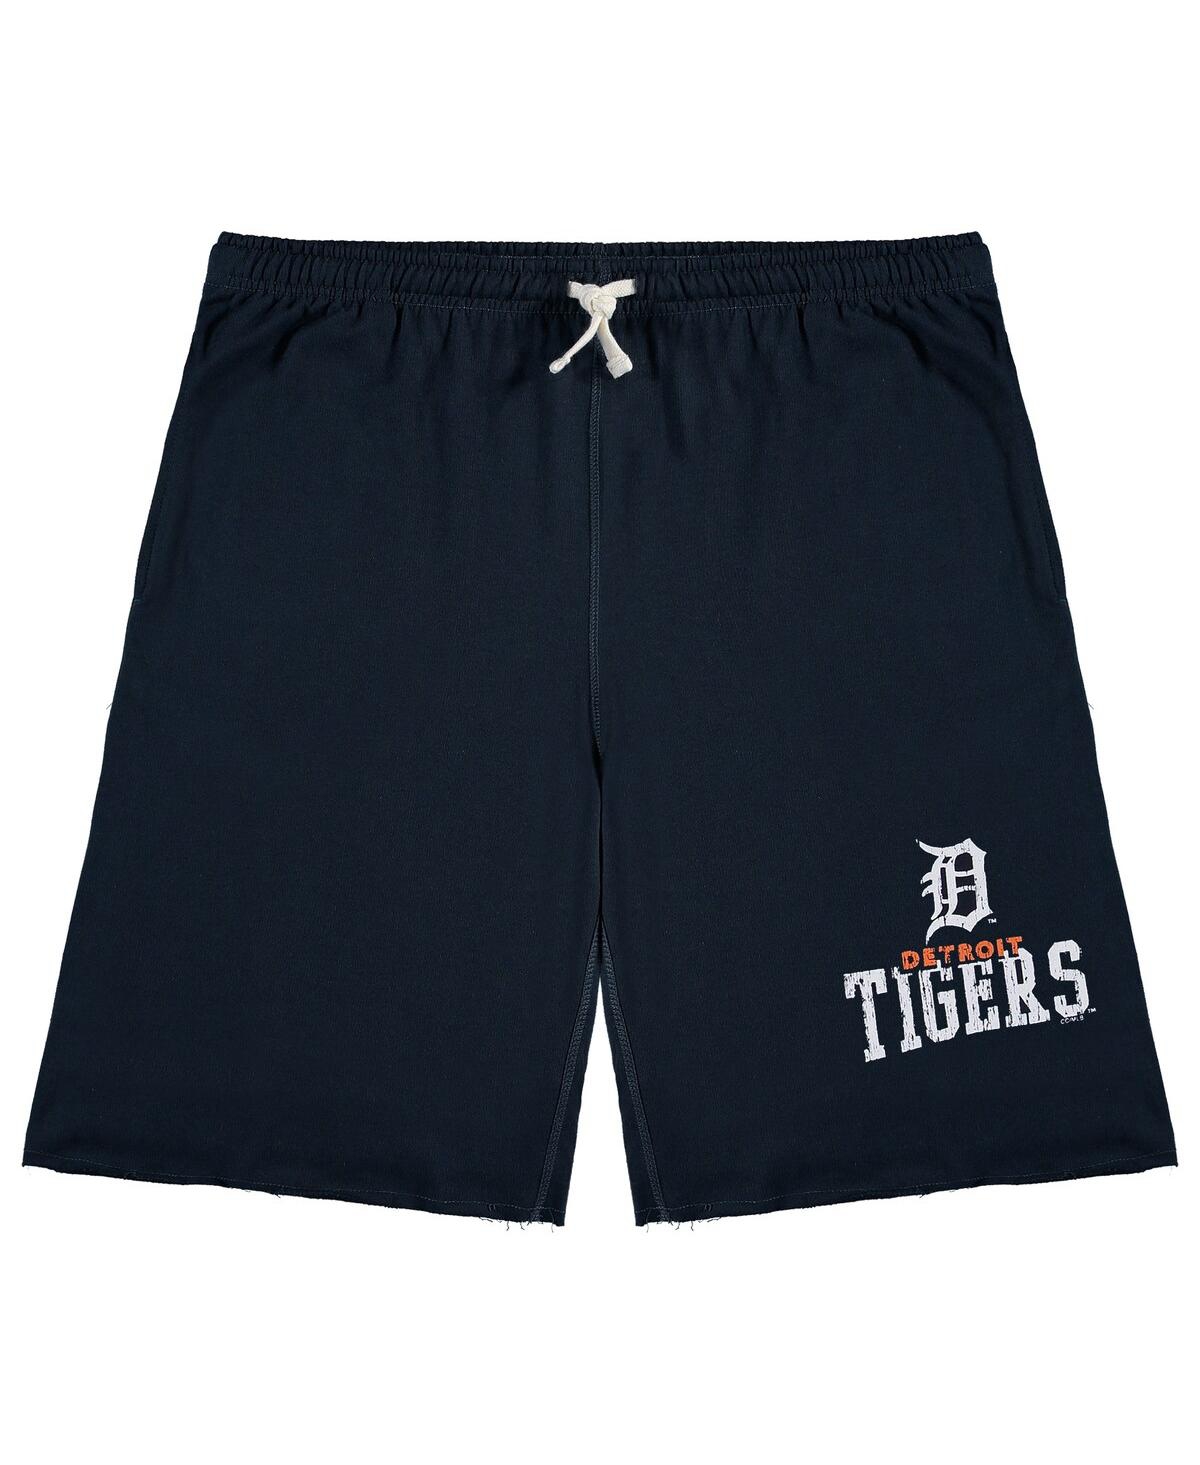 PROFILE MEN'S NAVY DETROIT TIGERS BIG AND TALL FRENCH TERRY SHORTS